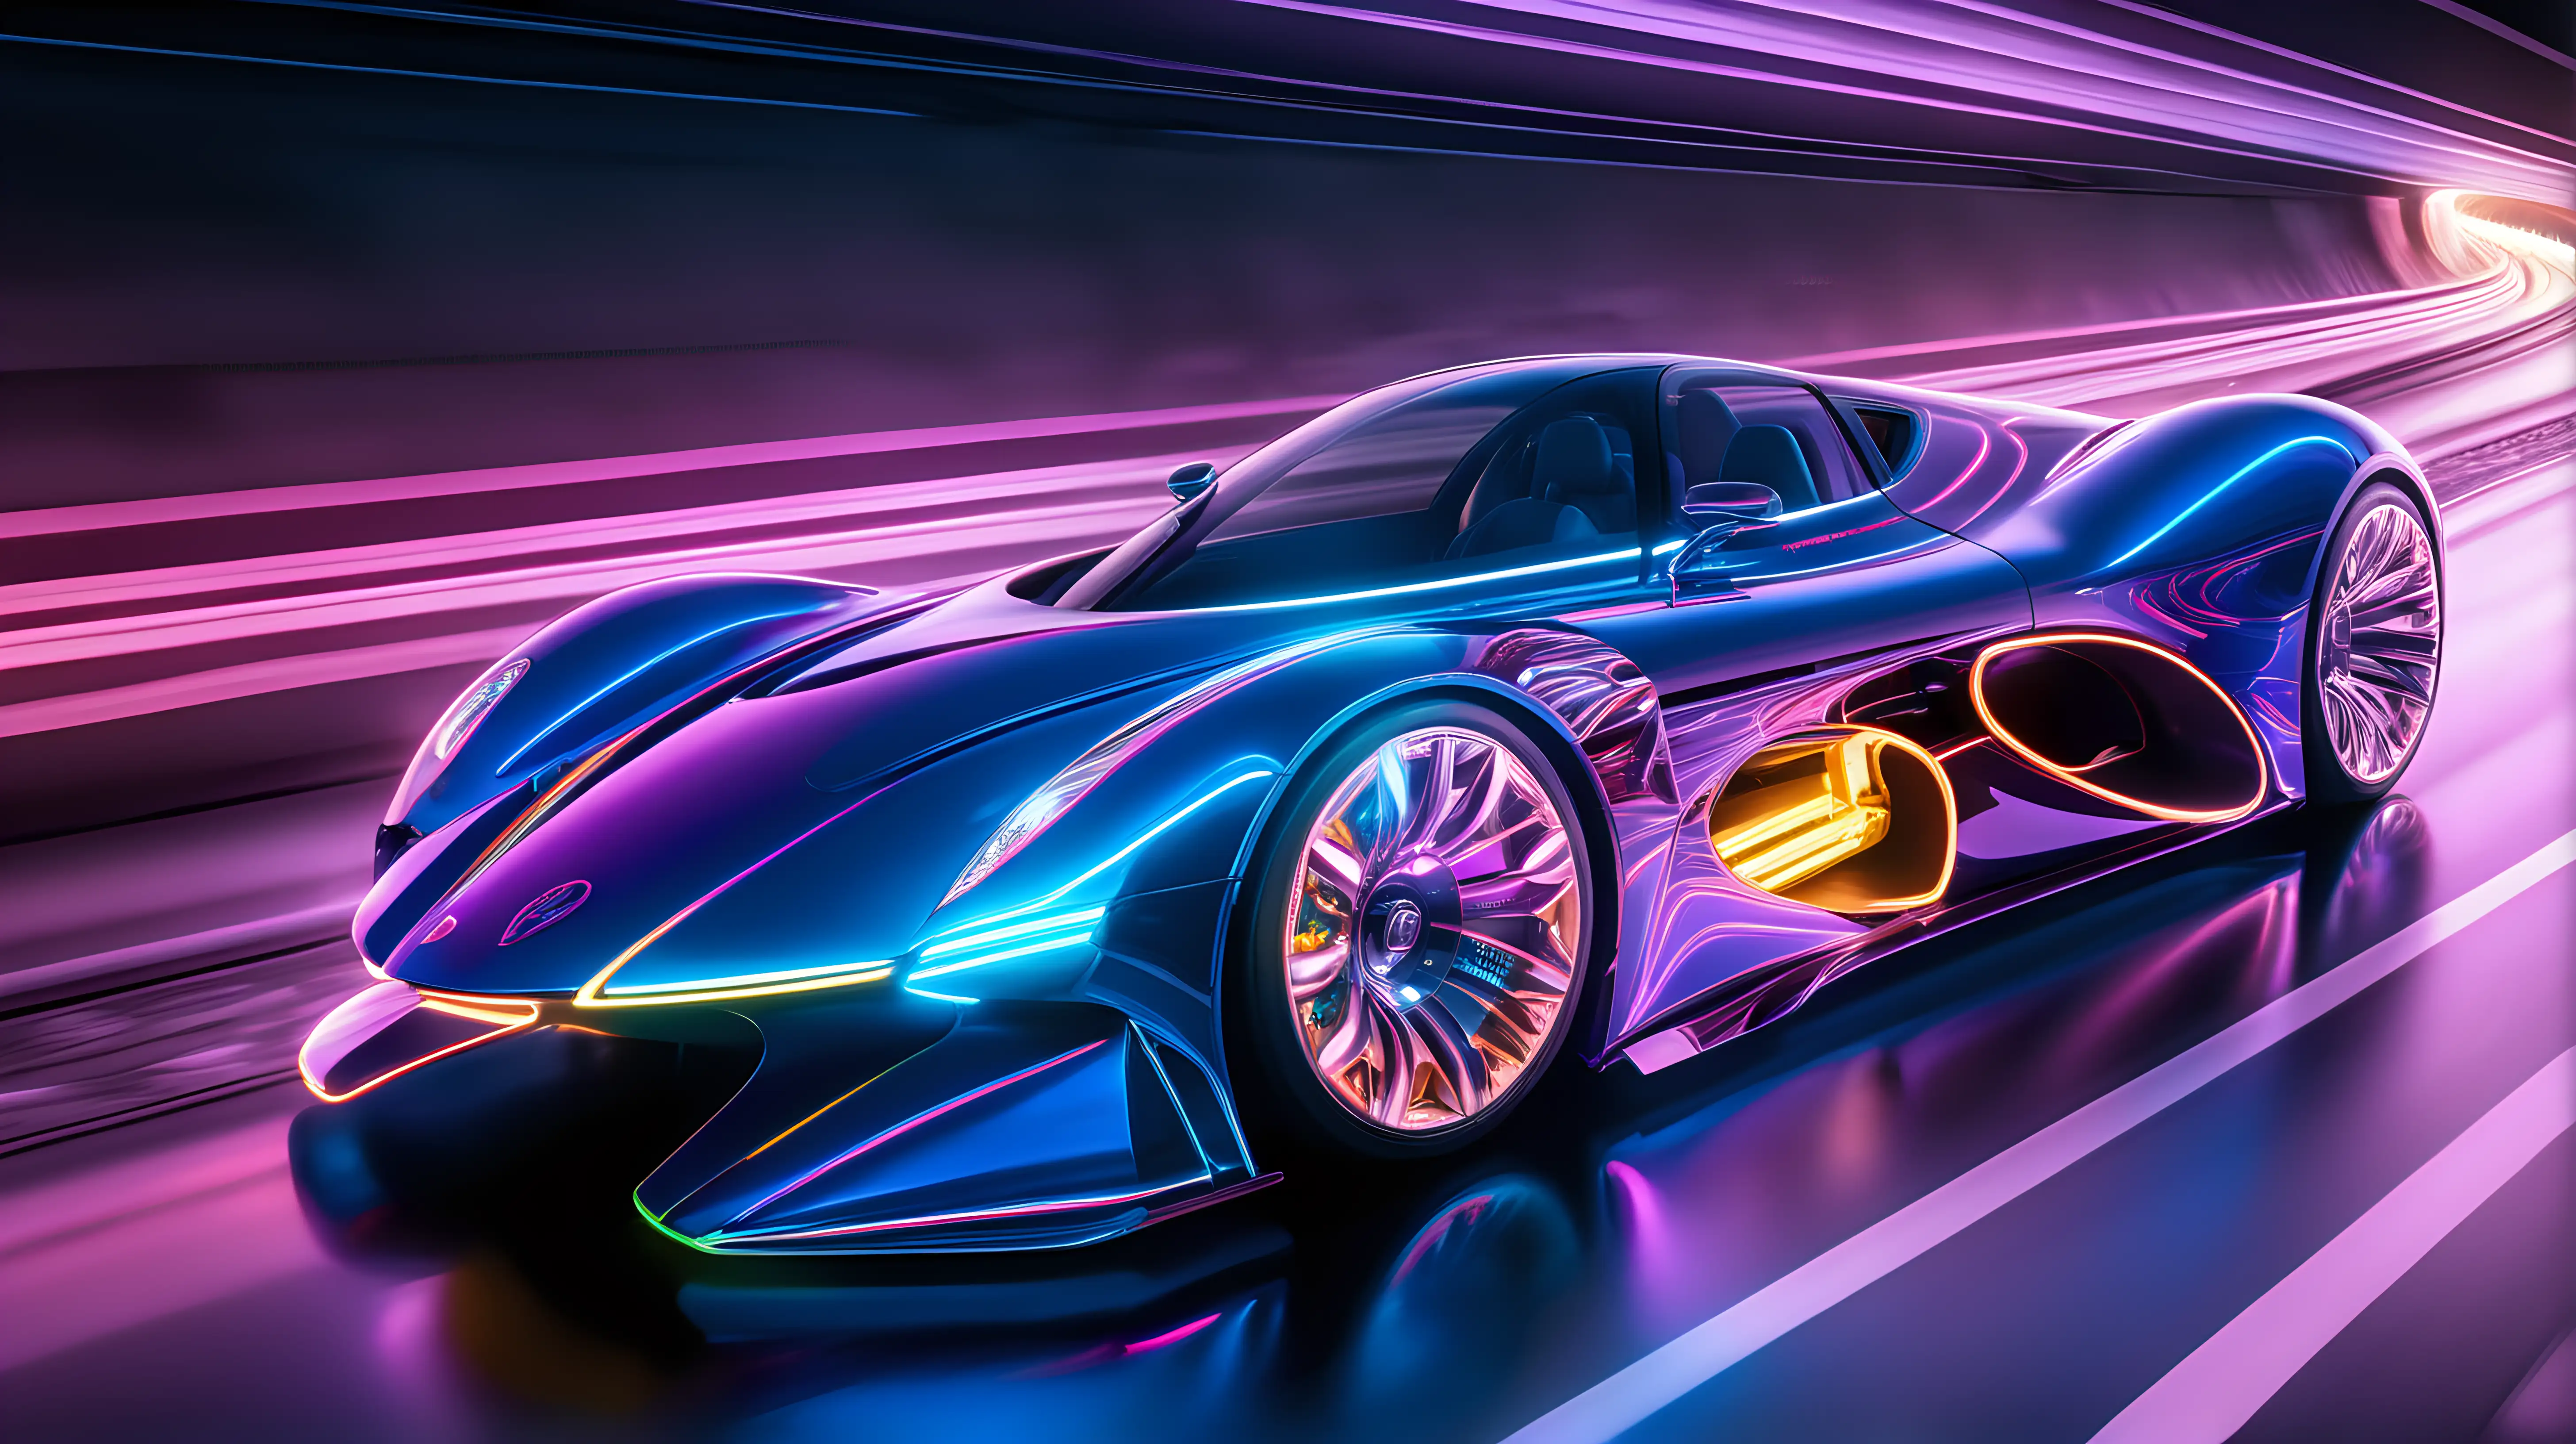 A dynamic image of a futuristic car bursting out of a tunnel with blazing speed, illuminated by the neon lights reflecting off its polished surface, creating a mesmerizing visual for wallpaper enthusiasts.